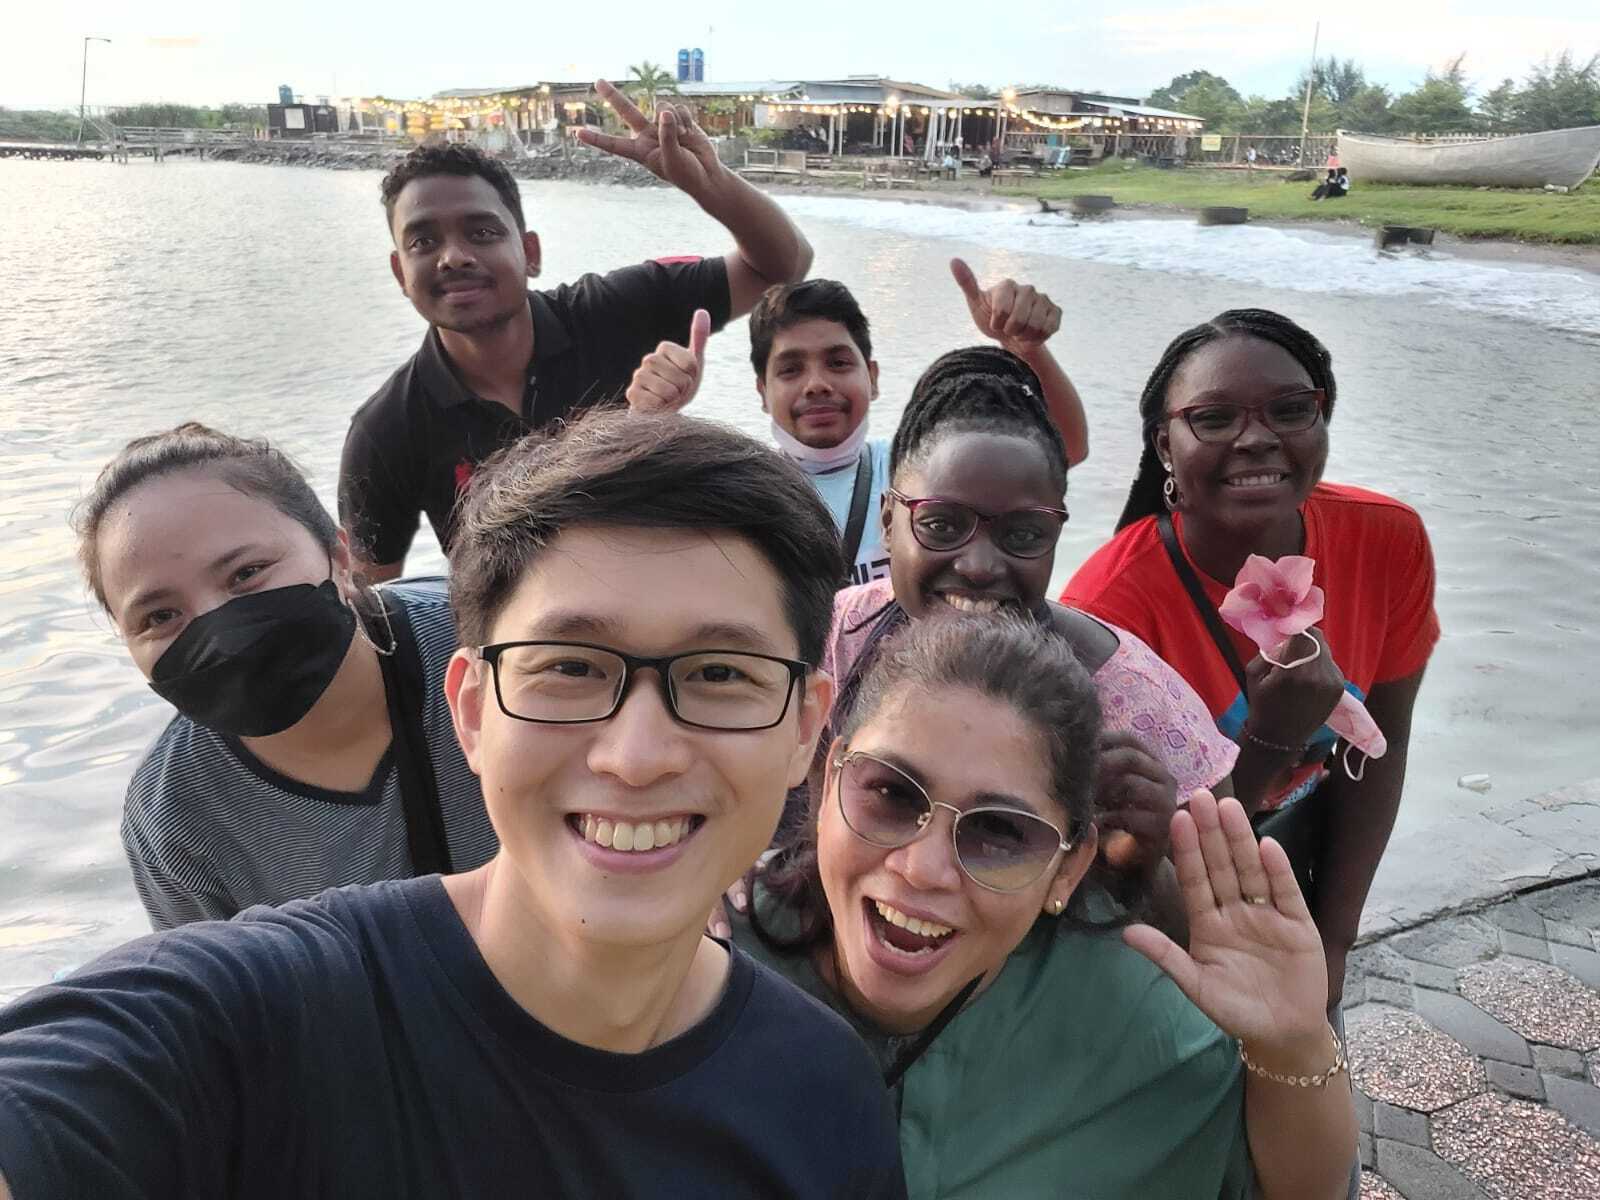 A group of seven people of different nationalities take a selfie together.